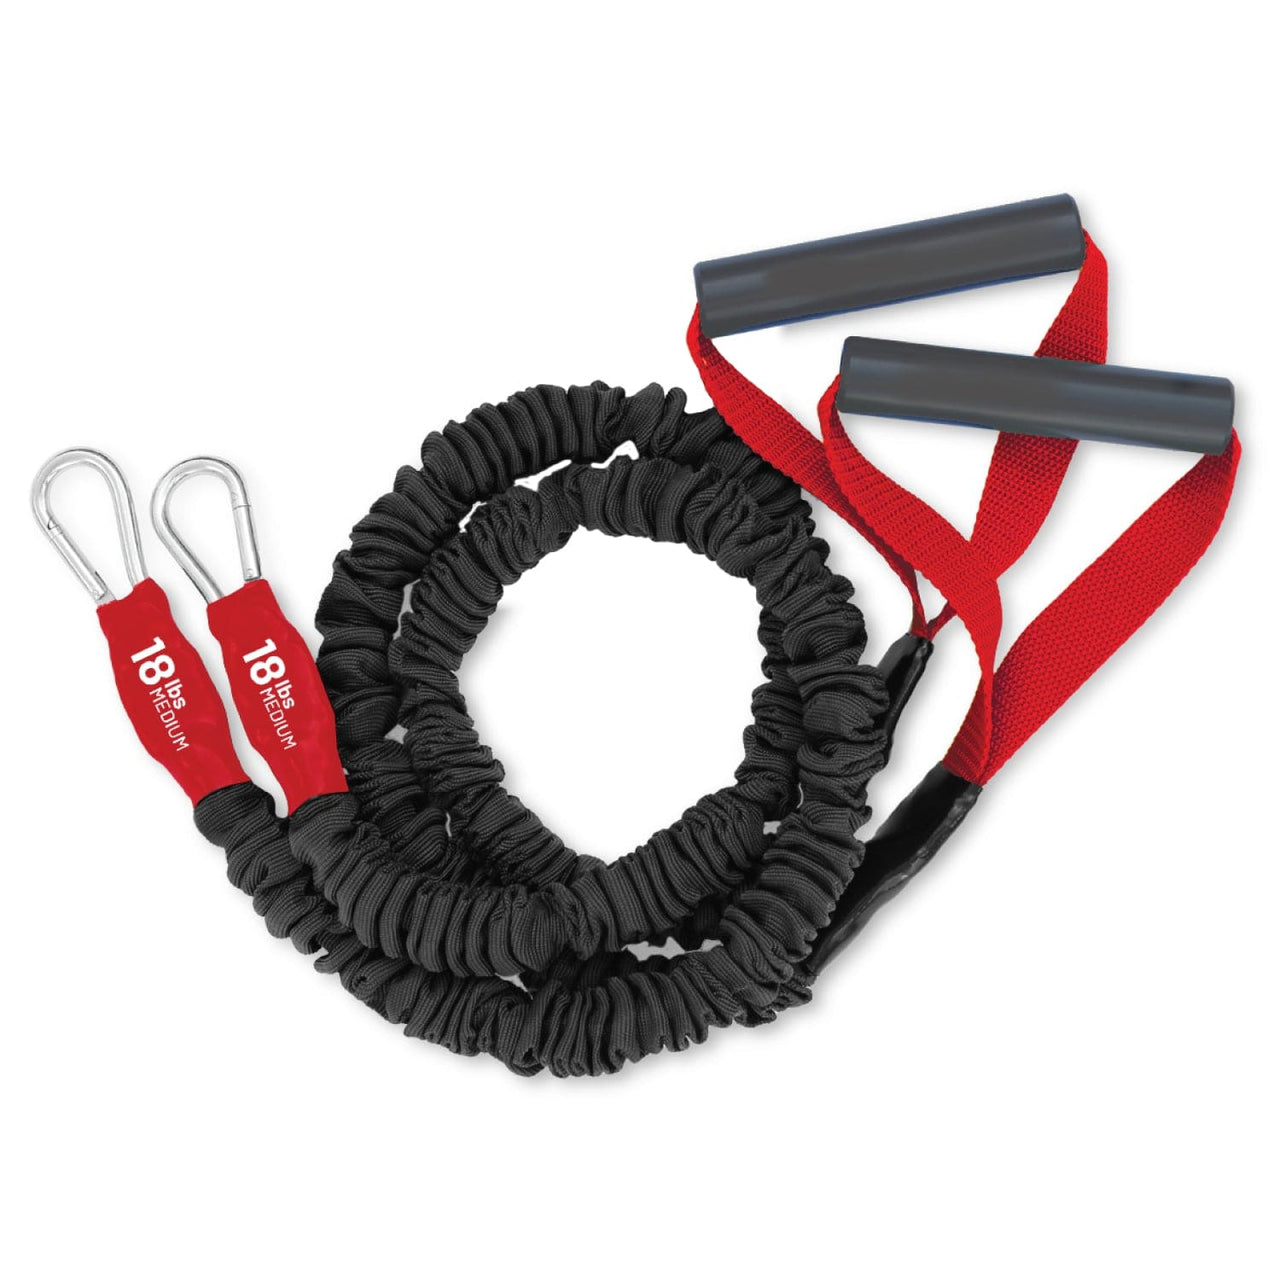 Our Medium X-Over Set of bands is 2 short bands with a handle and clip that are designed to be crossed over. This resistance level is used to increase mobility in shoulders, and strengthen core abs. Know for increasing shoulder strength and rotator cuff mobility. These bands also reduce shoulder pain. Compare to Crossover Symmetry Bands